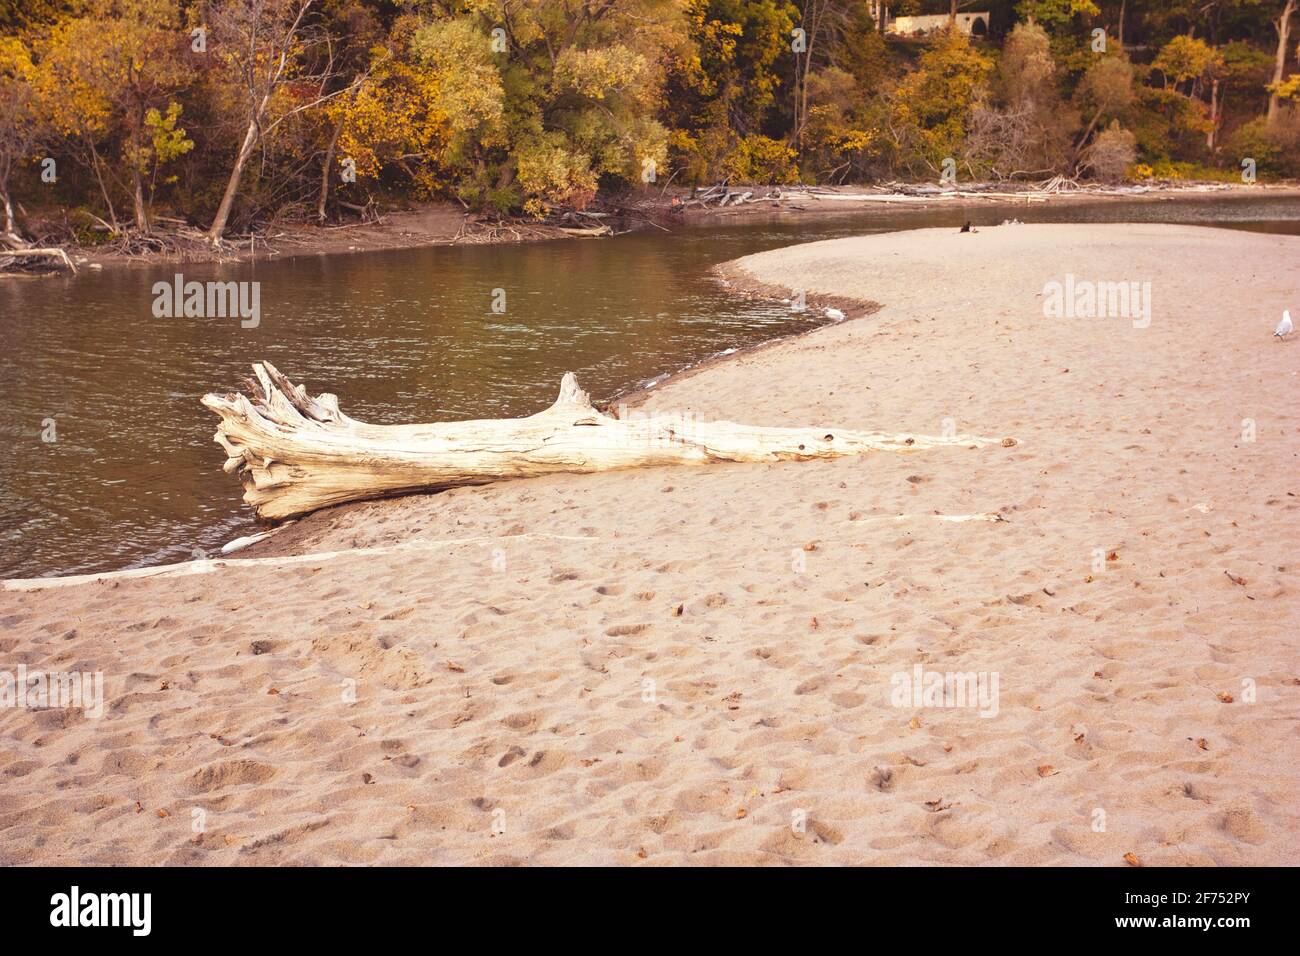 A fallen log lays on a beach during a sunny autumn day in Toronto. Stock Photo